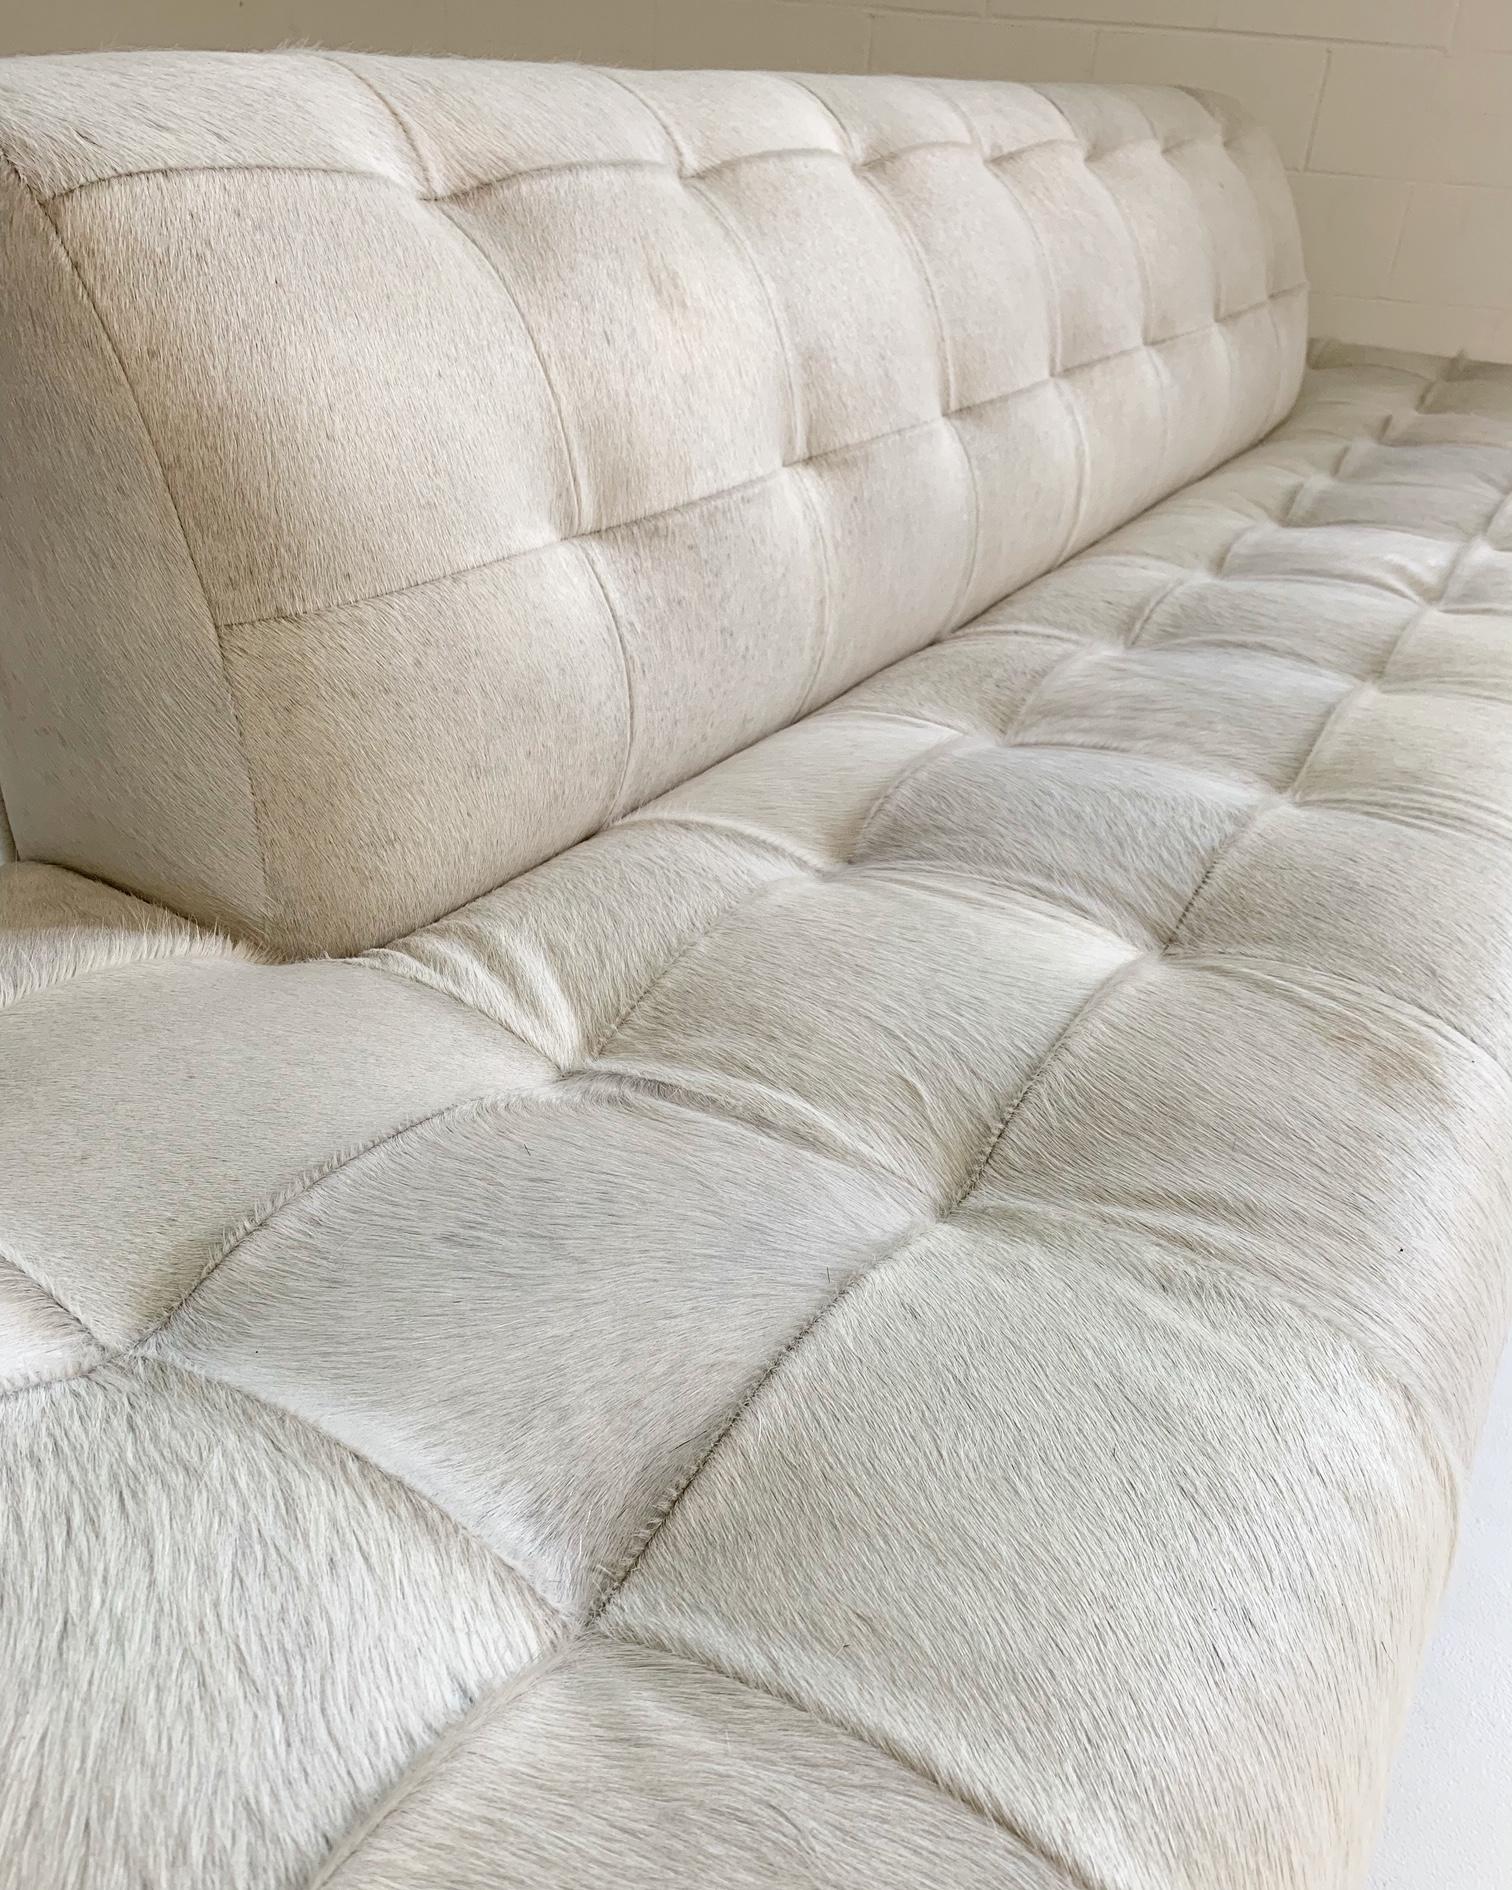 Our master upholstery team had a brilliant design idea when they came upon this vintage Adrian Pearsall sofa. The ends of the couch were originally attached side tables that were falling apart. We eliminated the tables and extended the upholstery